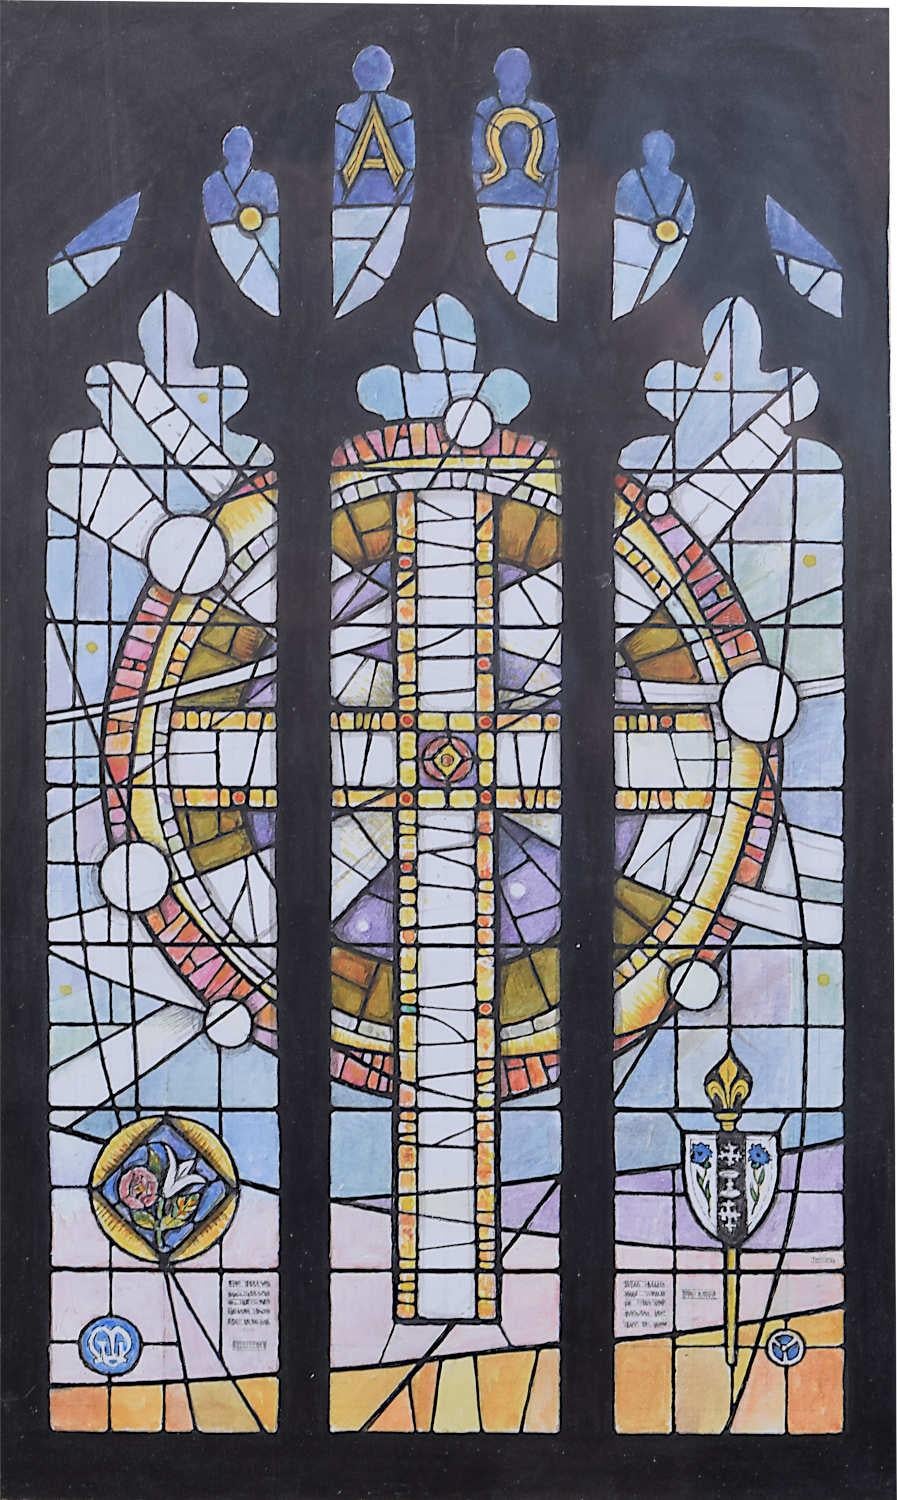 We acquired a series of watercolour stained glass designs from Jane Gray's studio. To find more scroll down to "More from this Seller" and below it click on "See all from this seller." 

Jane Gray (b.1931)
Stained Glass Design
Watercolour
25.5 x